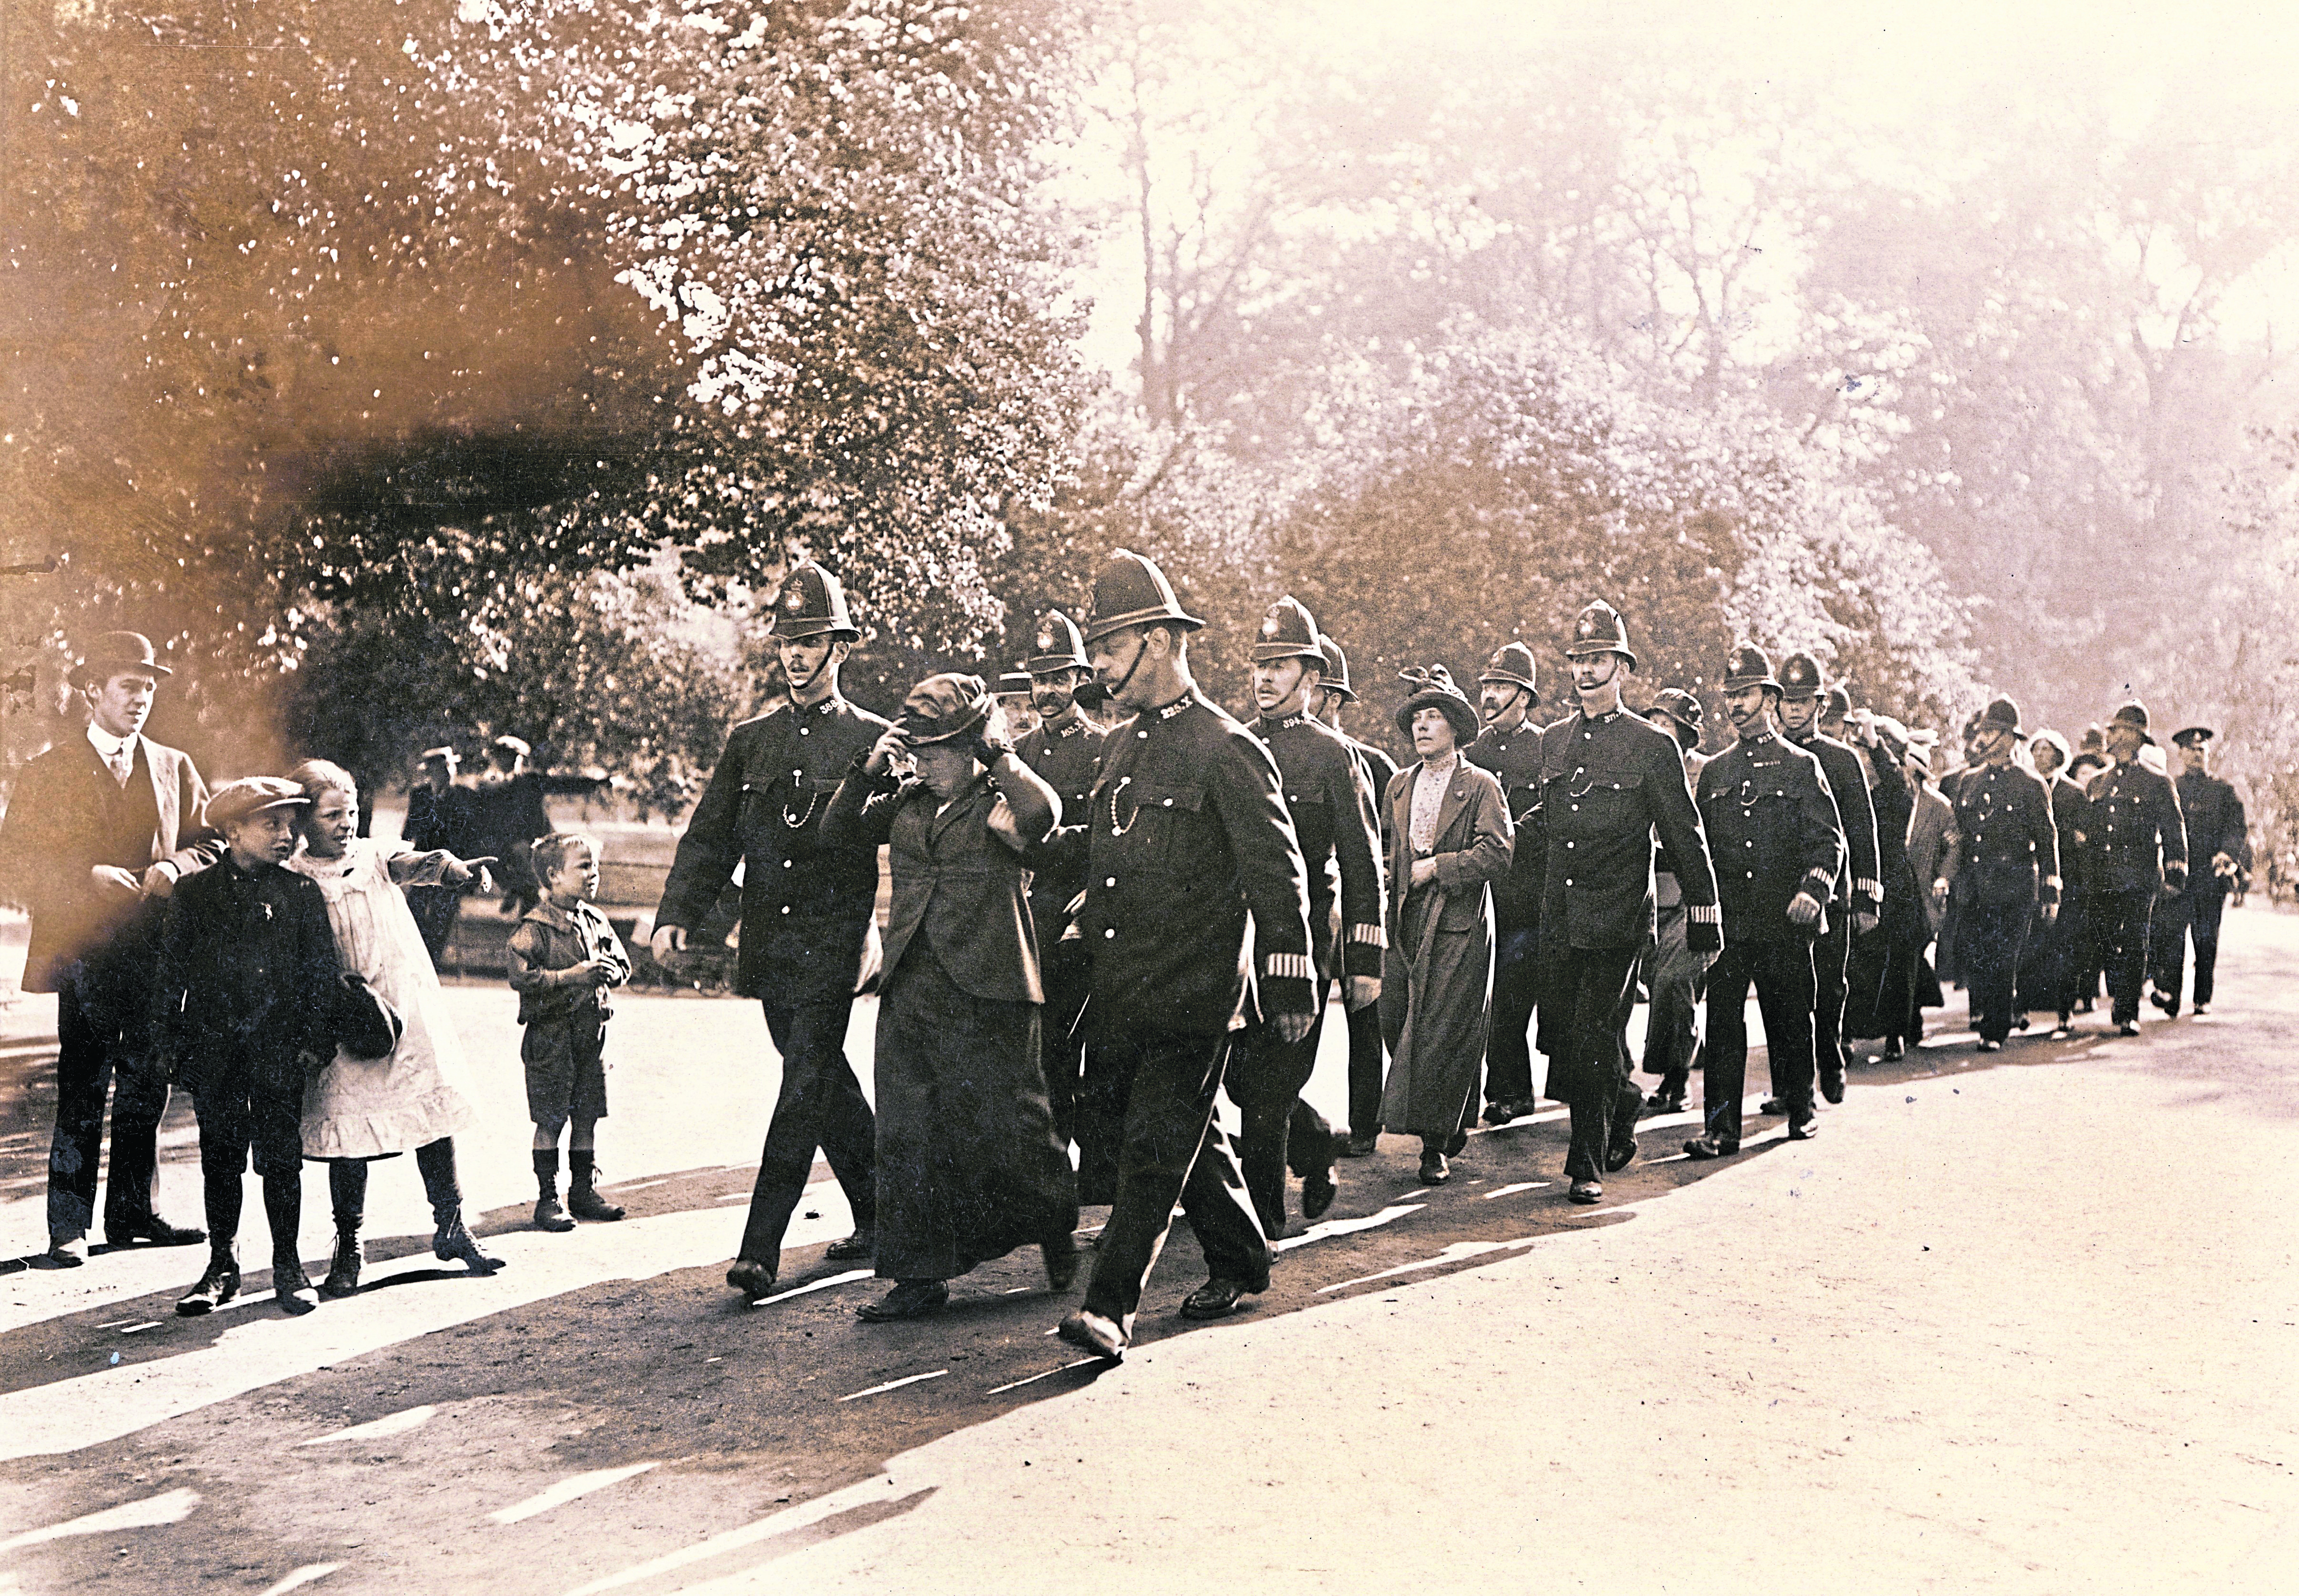 Suffragettes are pictured marching in London in the lead-up to women securing voting rights on November 21, 1918.